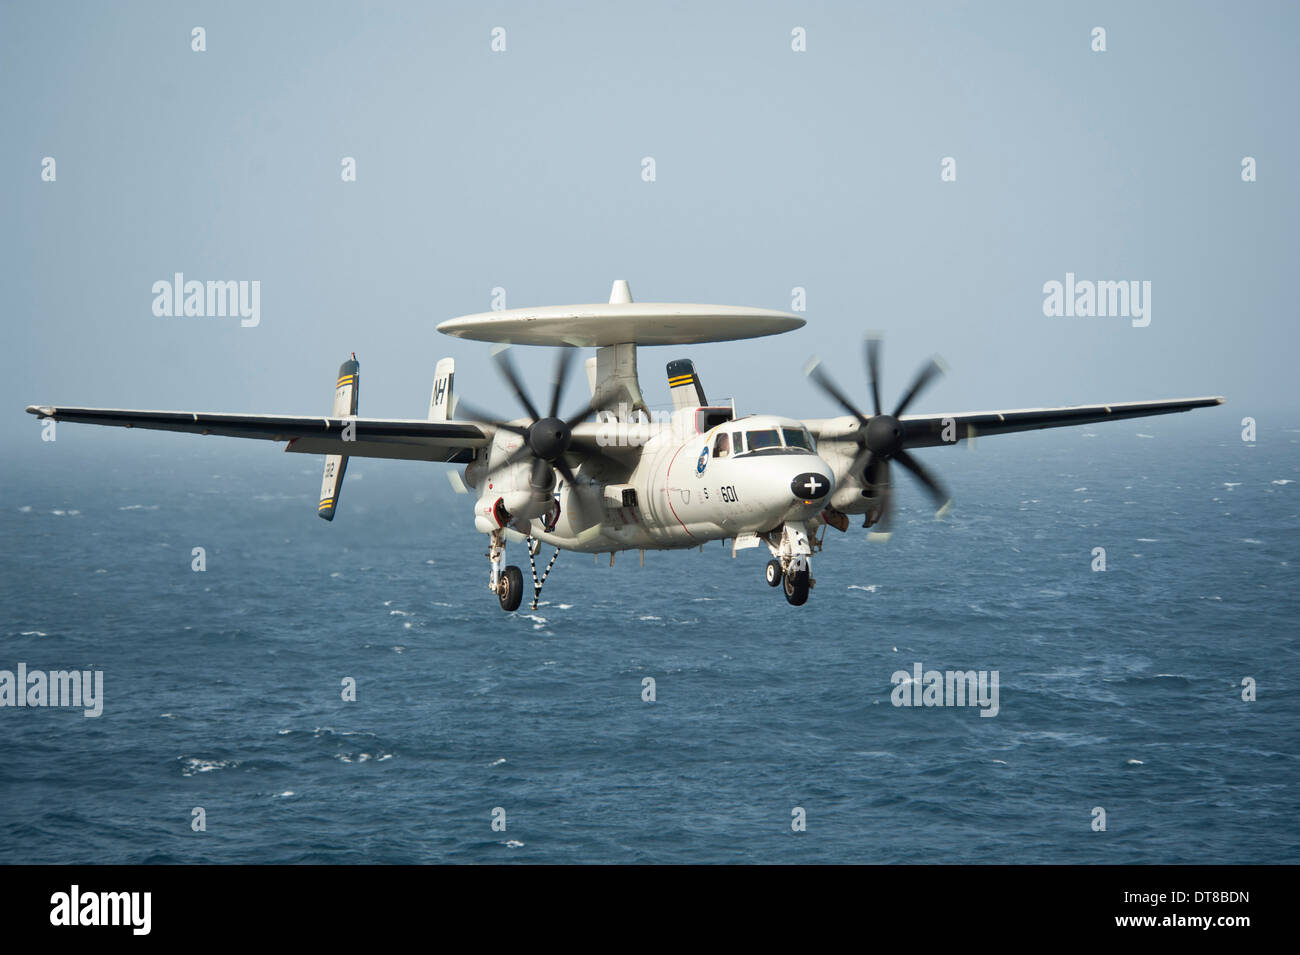 North Arabian Sea, July 22, 2013 - An E-2C Hawkeye prepares to land on the flight deck of the aircraft carrier USS Nimitz. Stock Photo